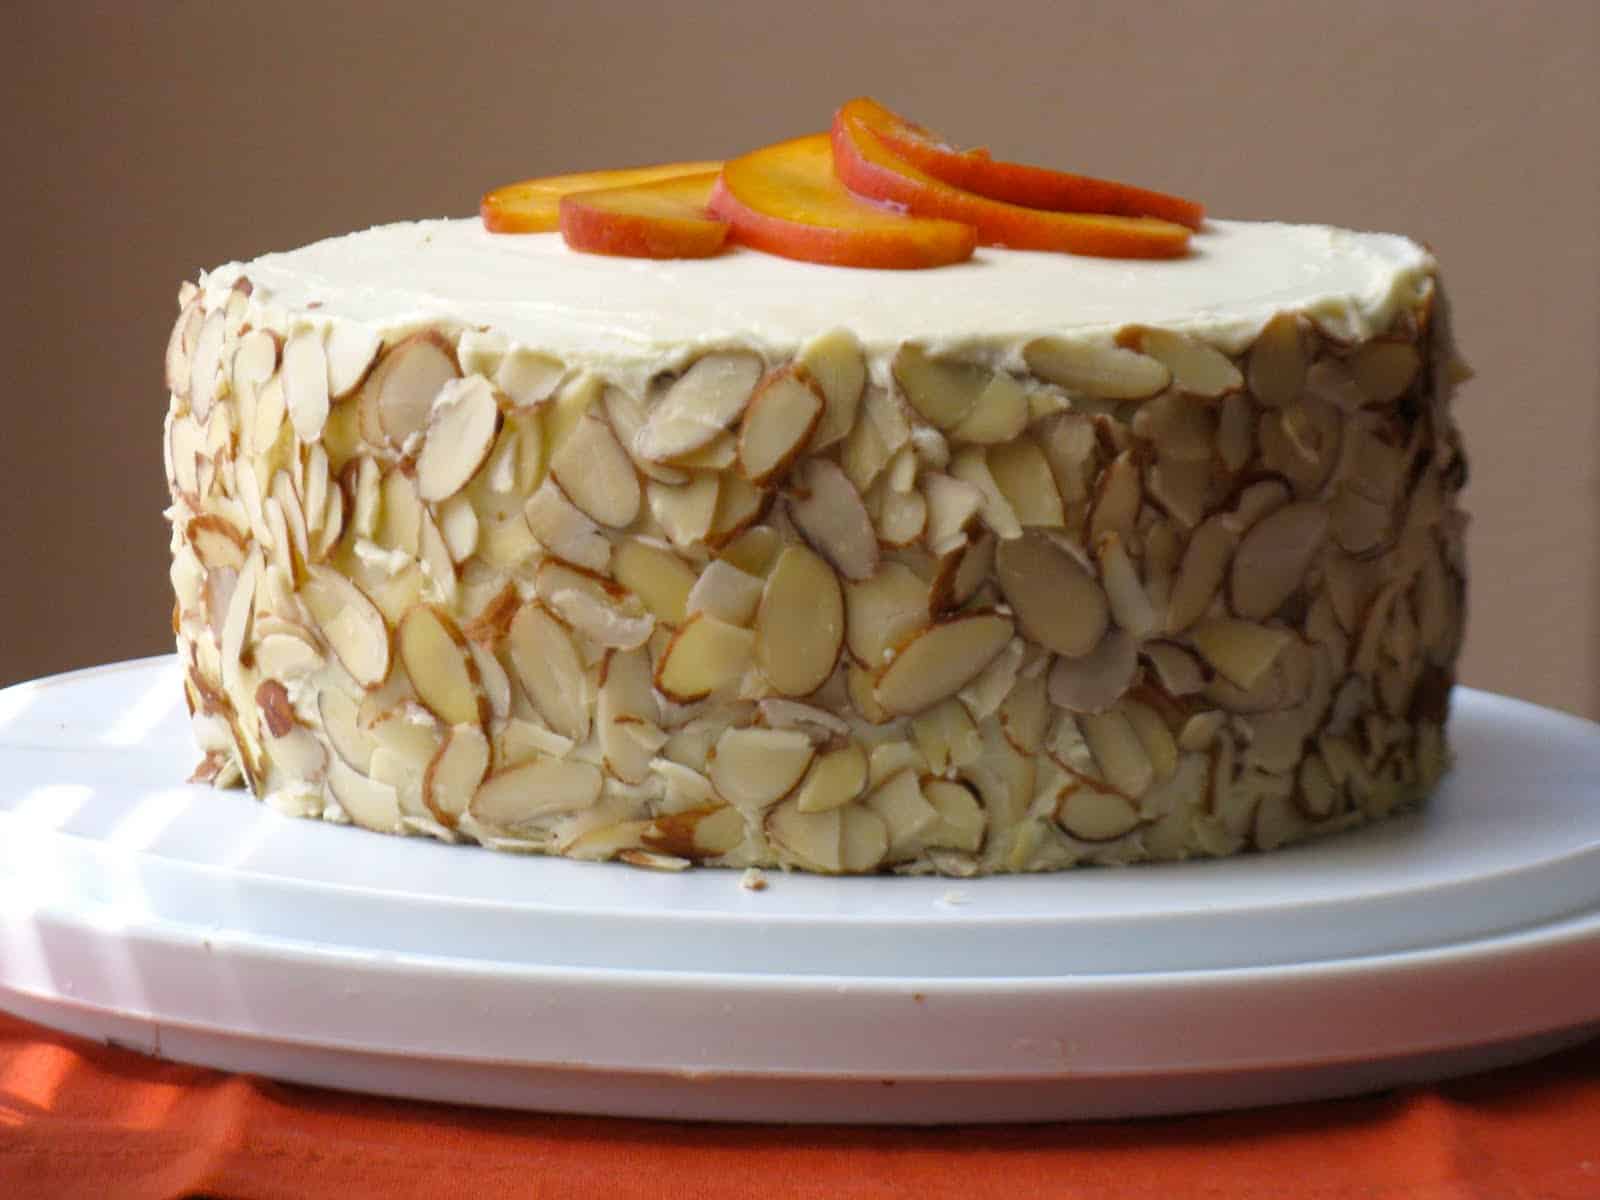 White chocolate layer cake with apricot filling and white chocolate buttercream